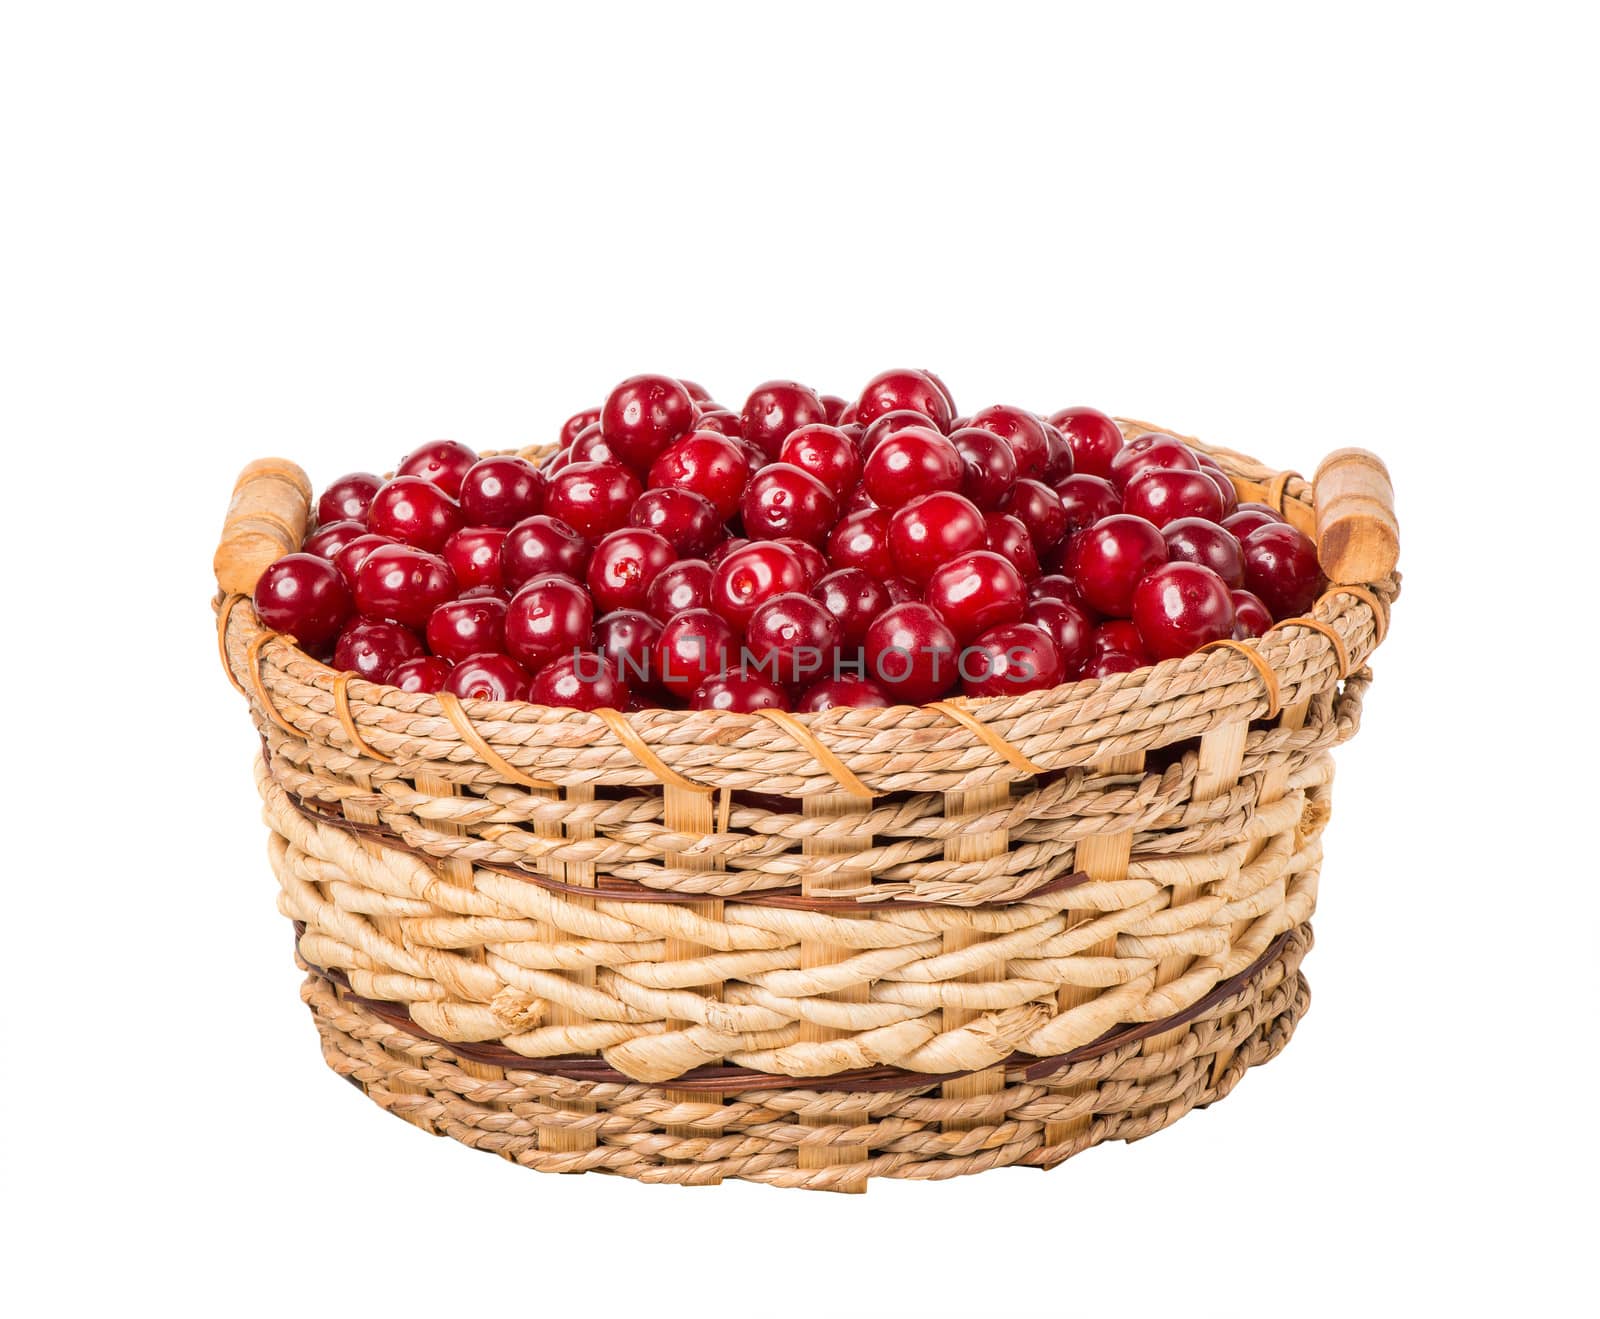 sweet cherry in basket isolated on white background by Draw05